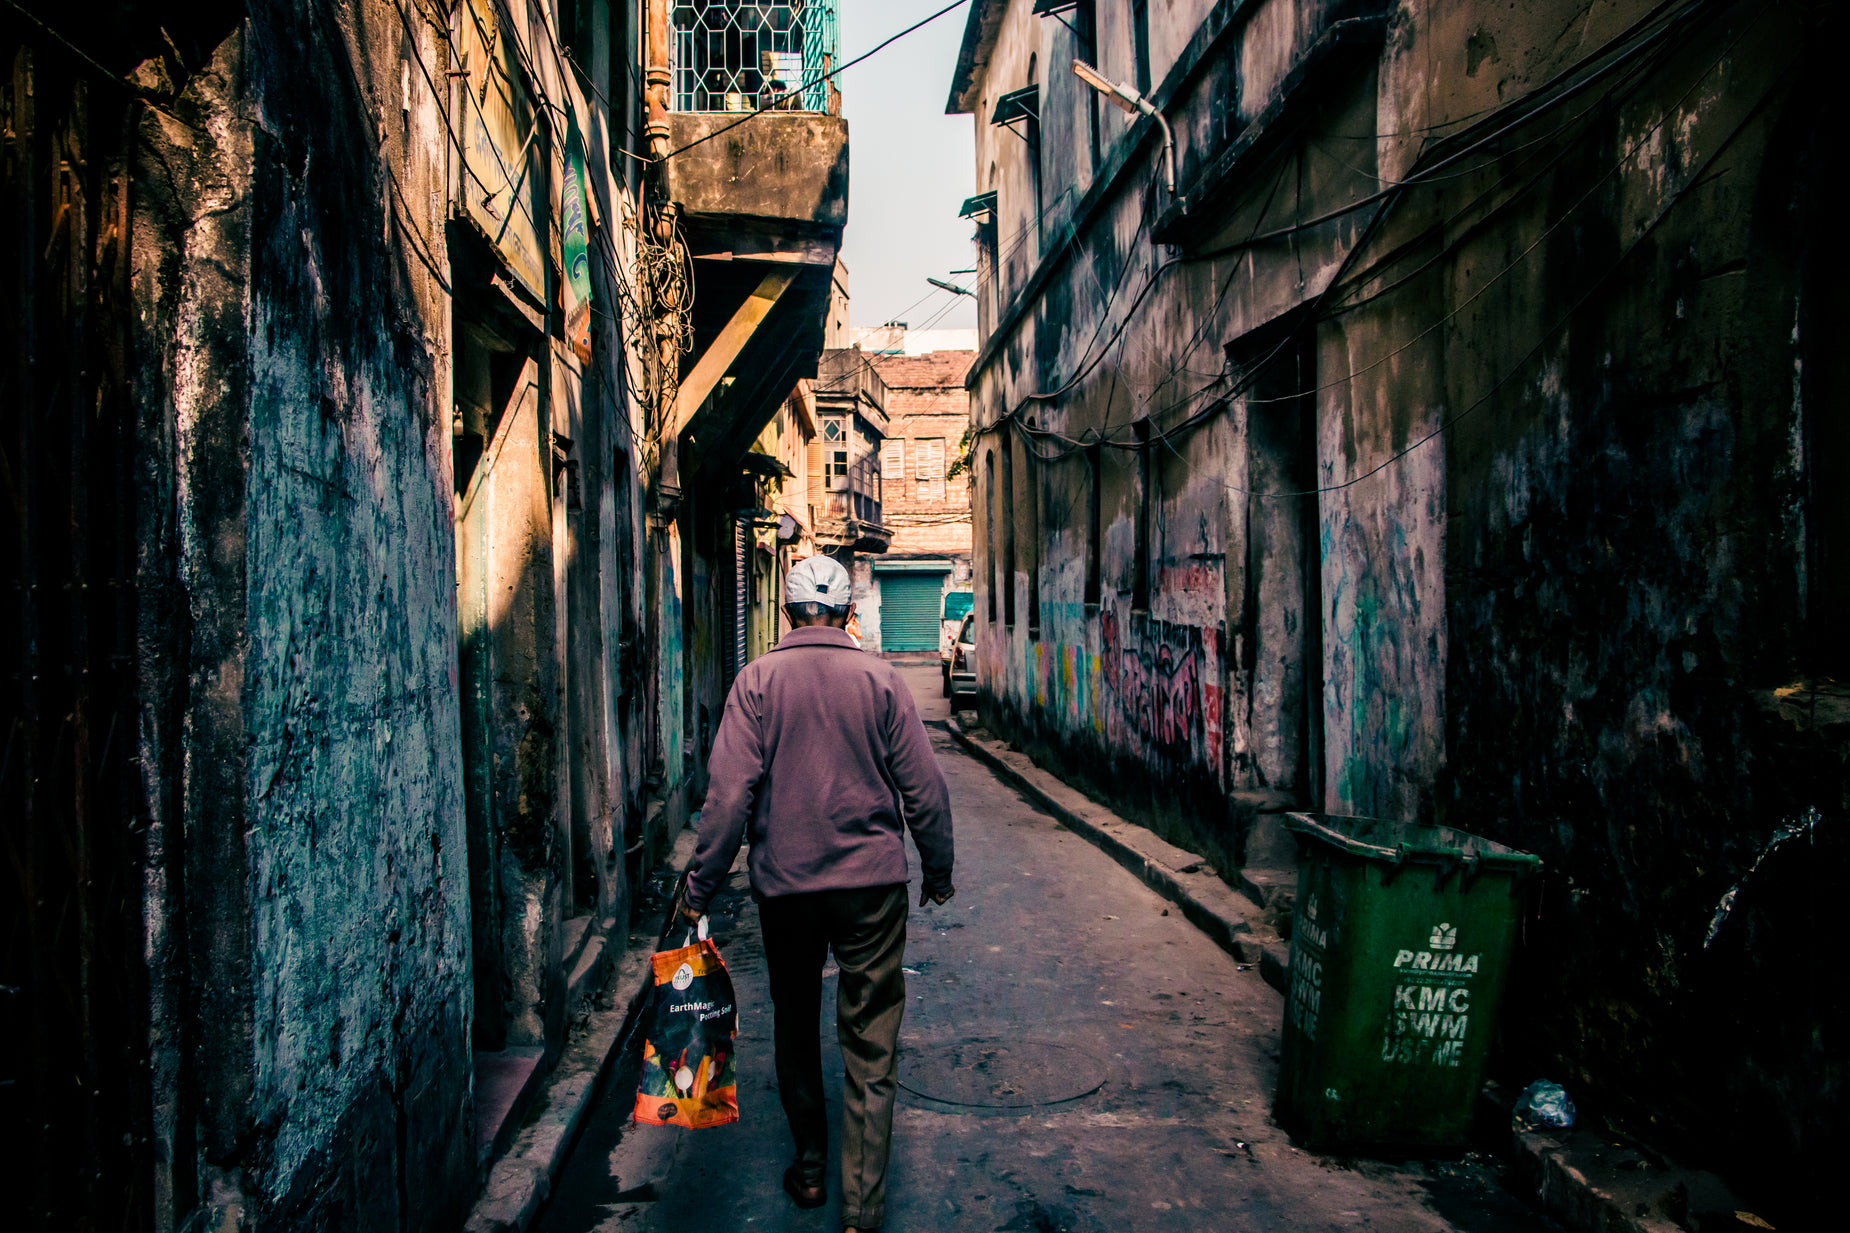 the man walks on a narrow alleyway with a bag